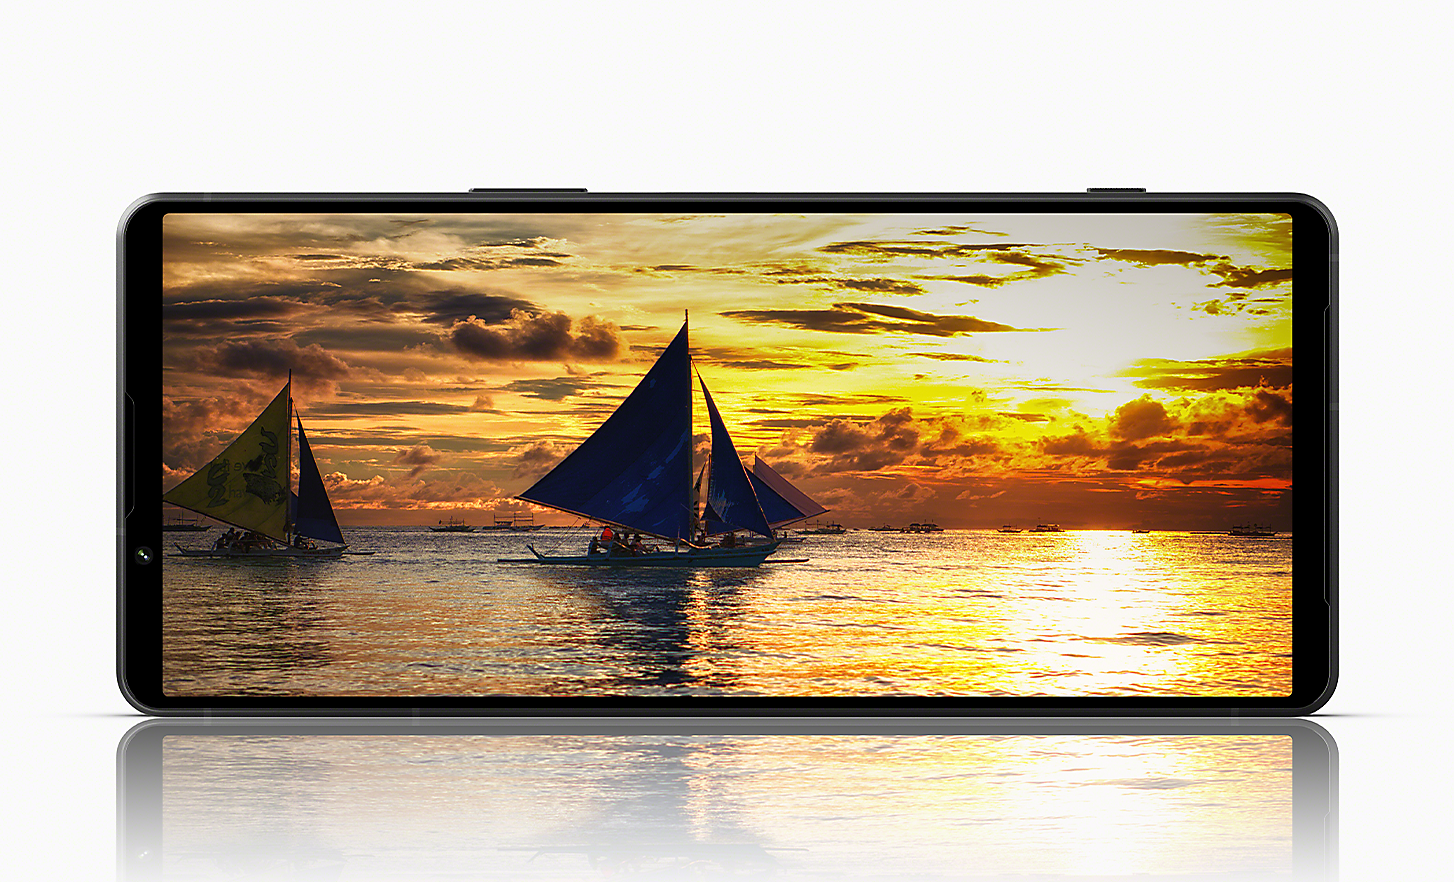 An Xperia 1 V in landscape position displaying an image of sailing boats at sea, set against a spectacular sunset